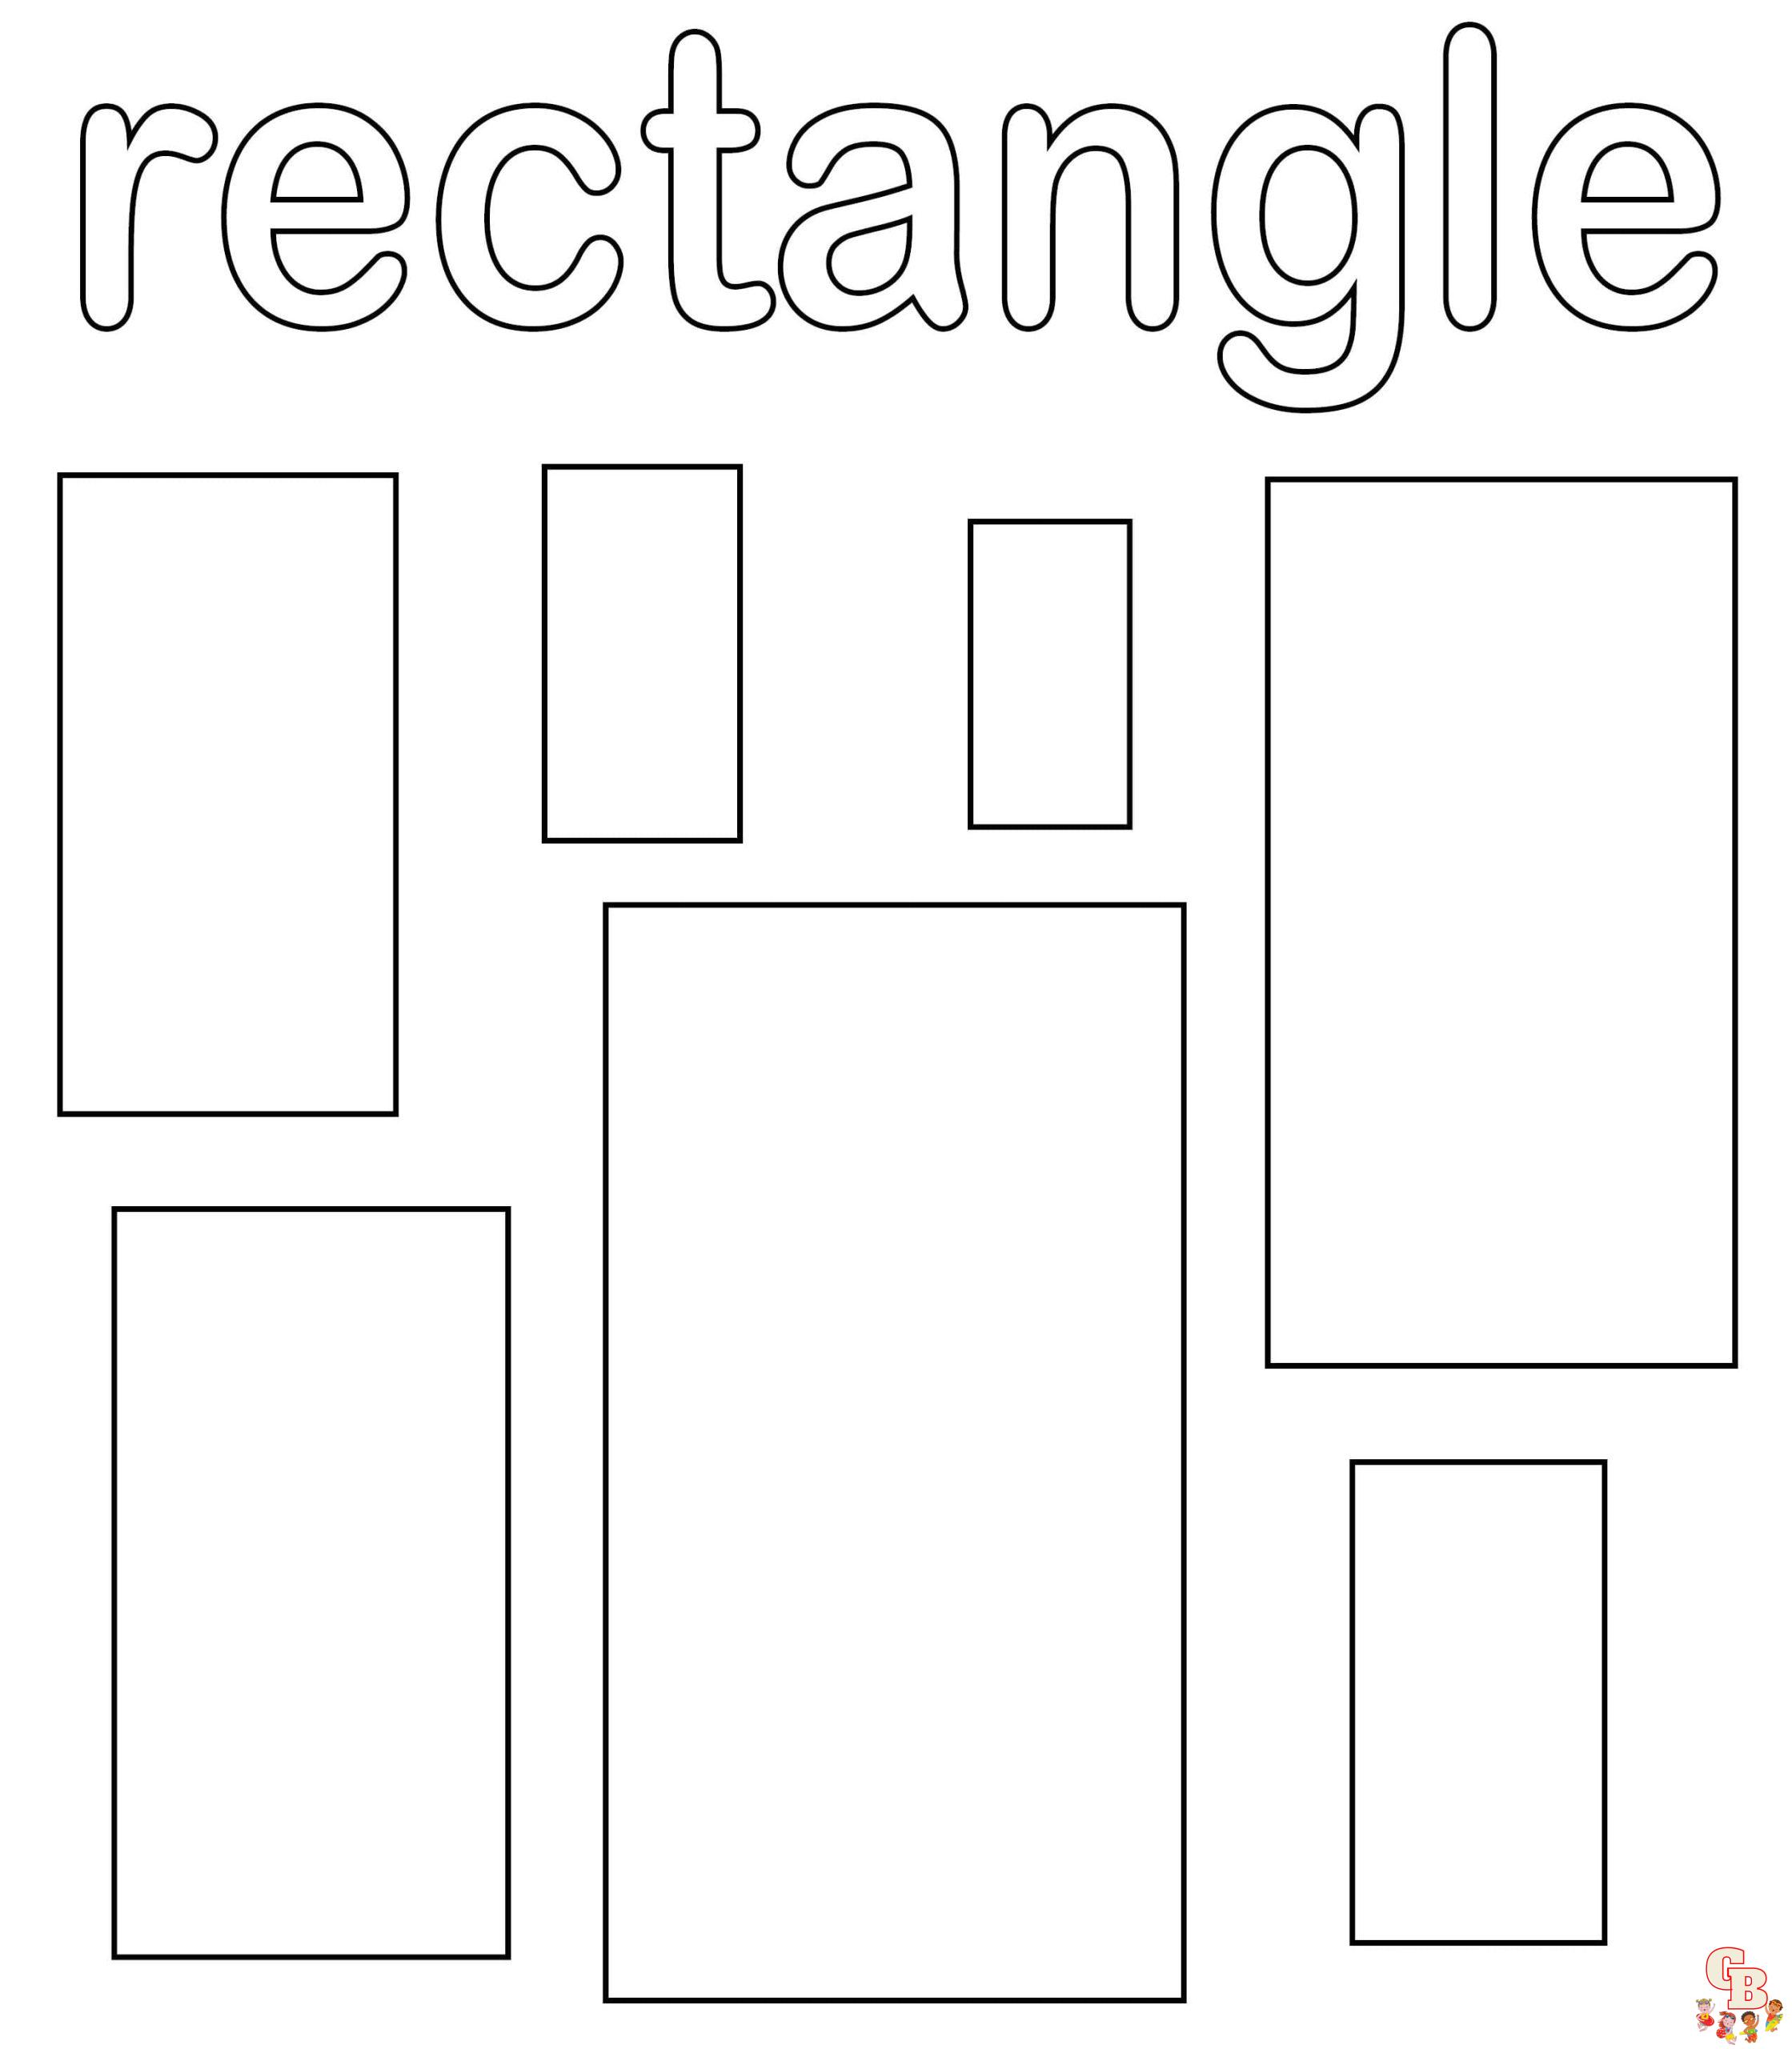 Printable rectangle coloring pages free for kids and adults